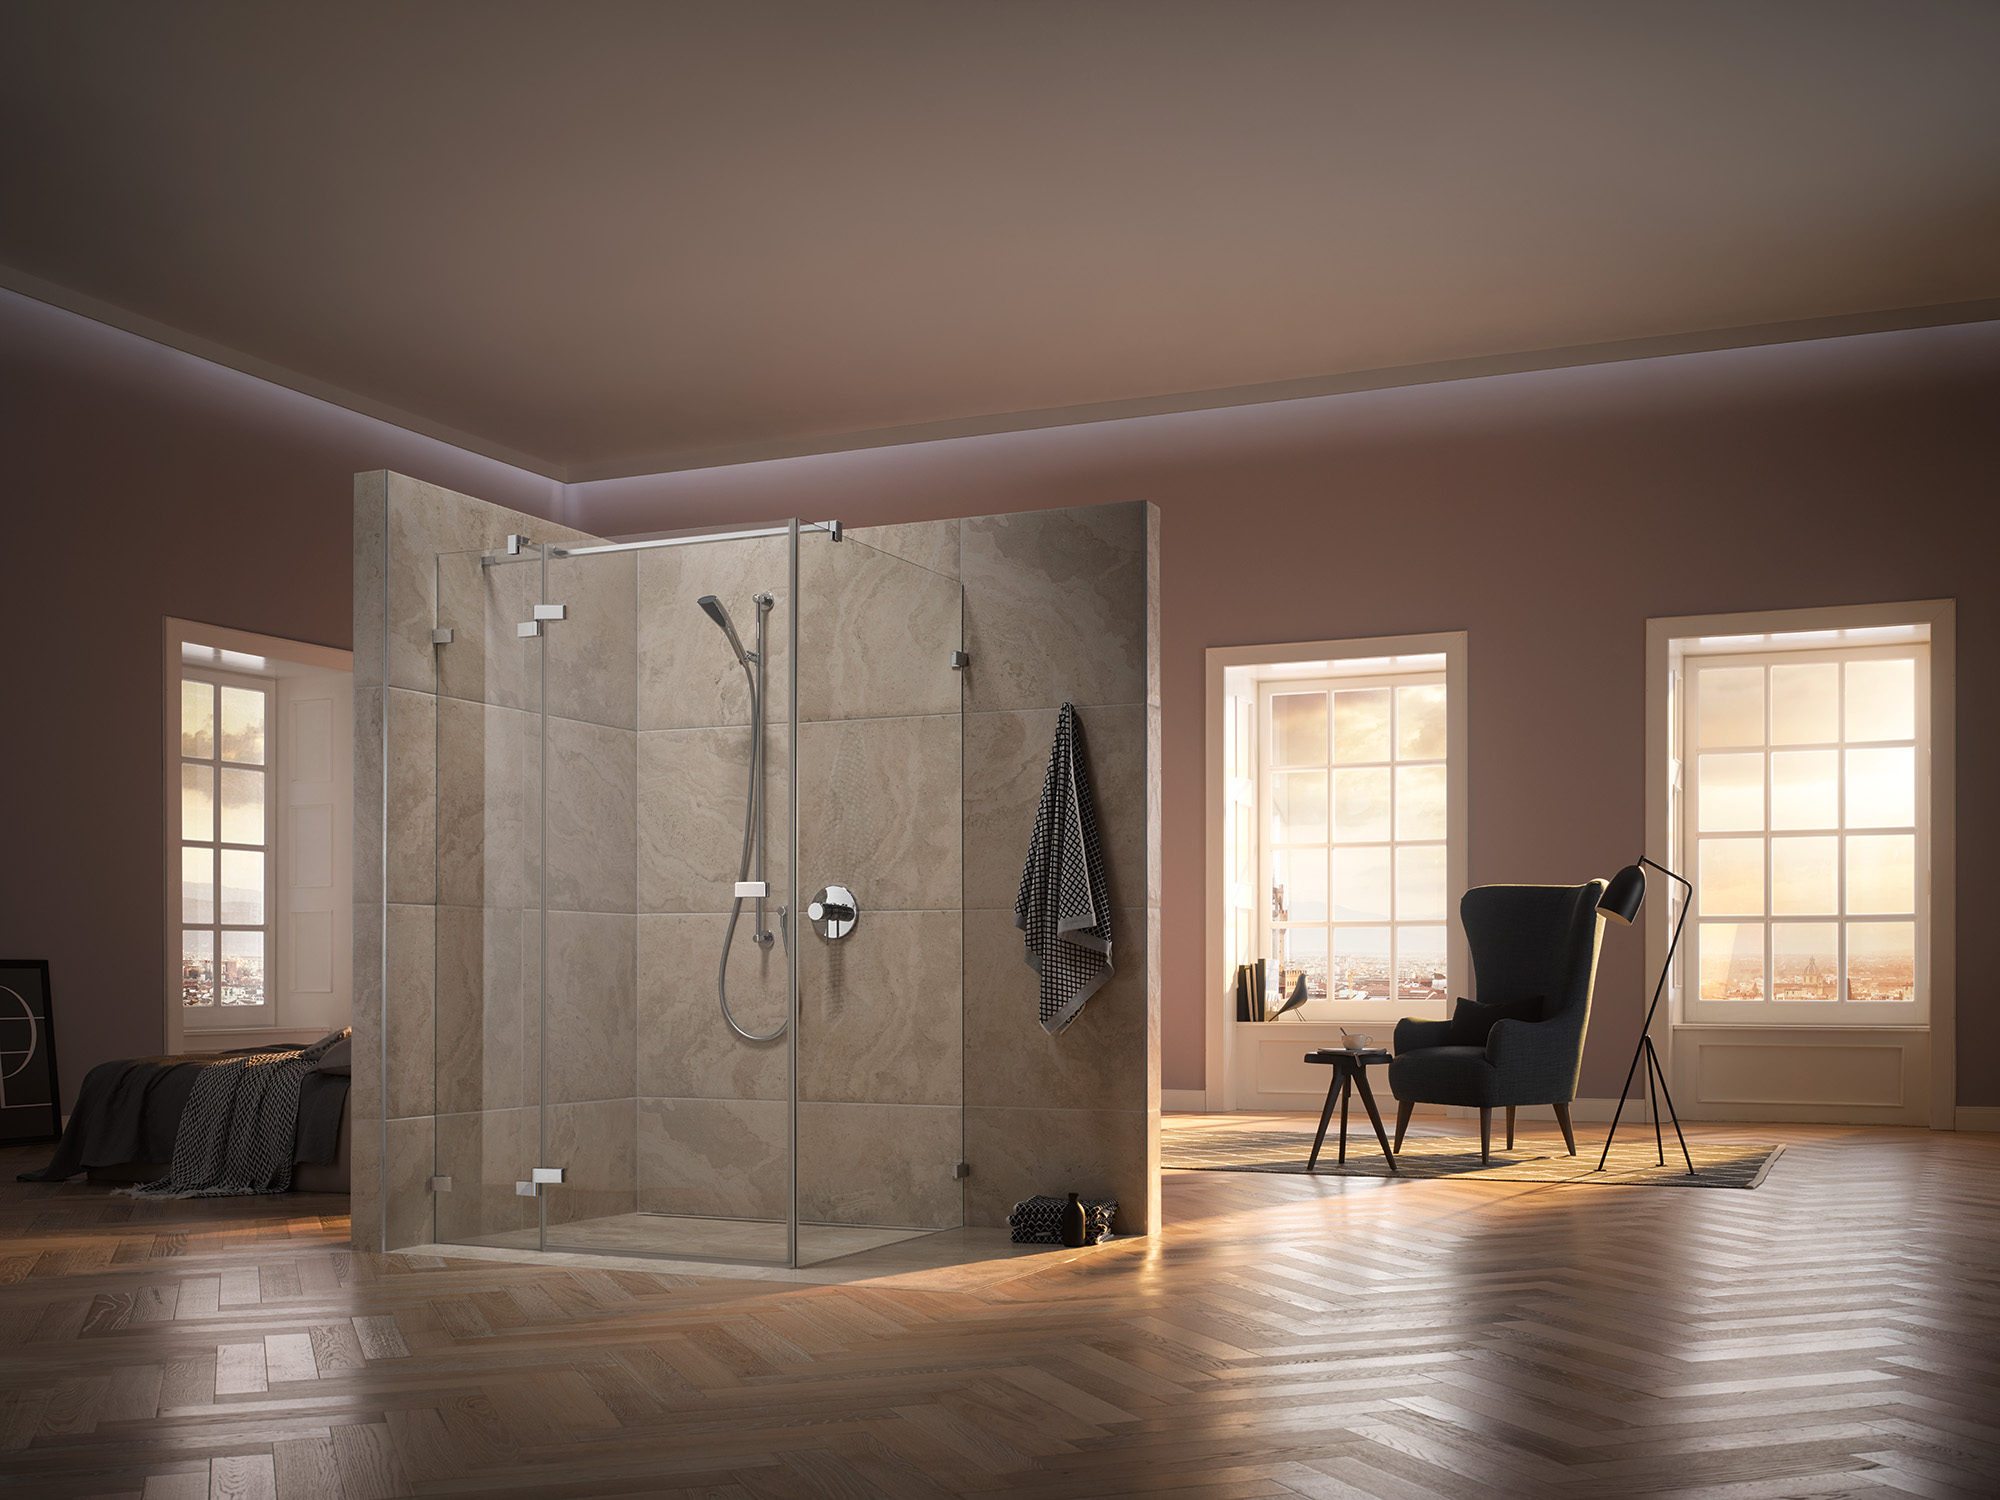 Kermi hinged shower enclosure, TUSCA single panel hinged door with fixed panel with wall hinge